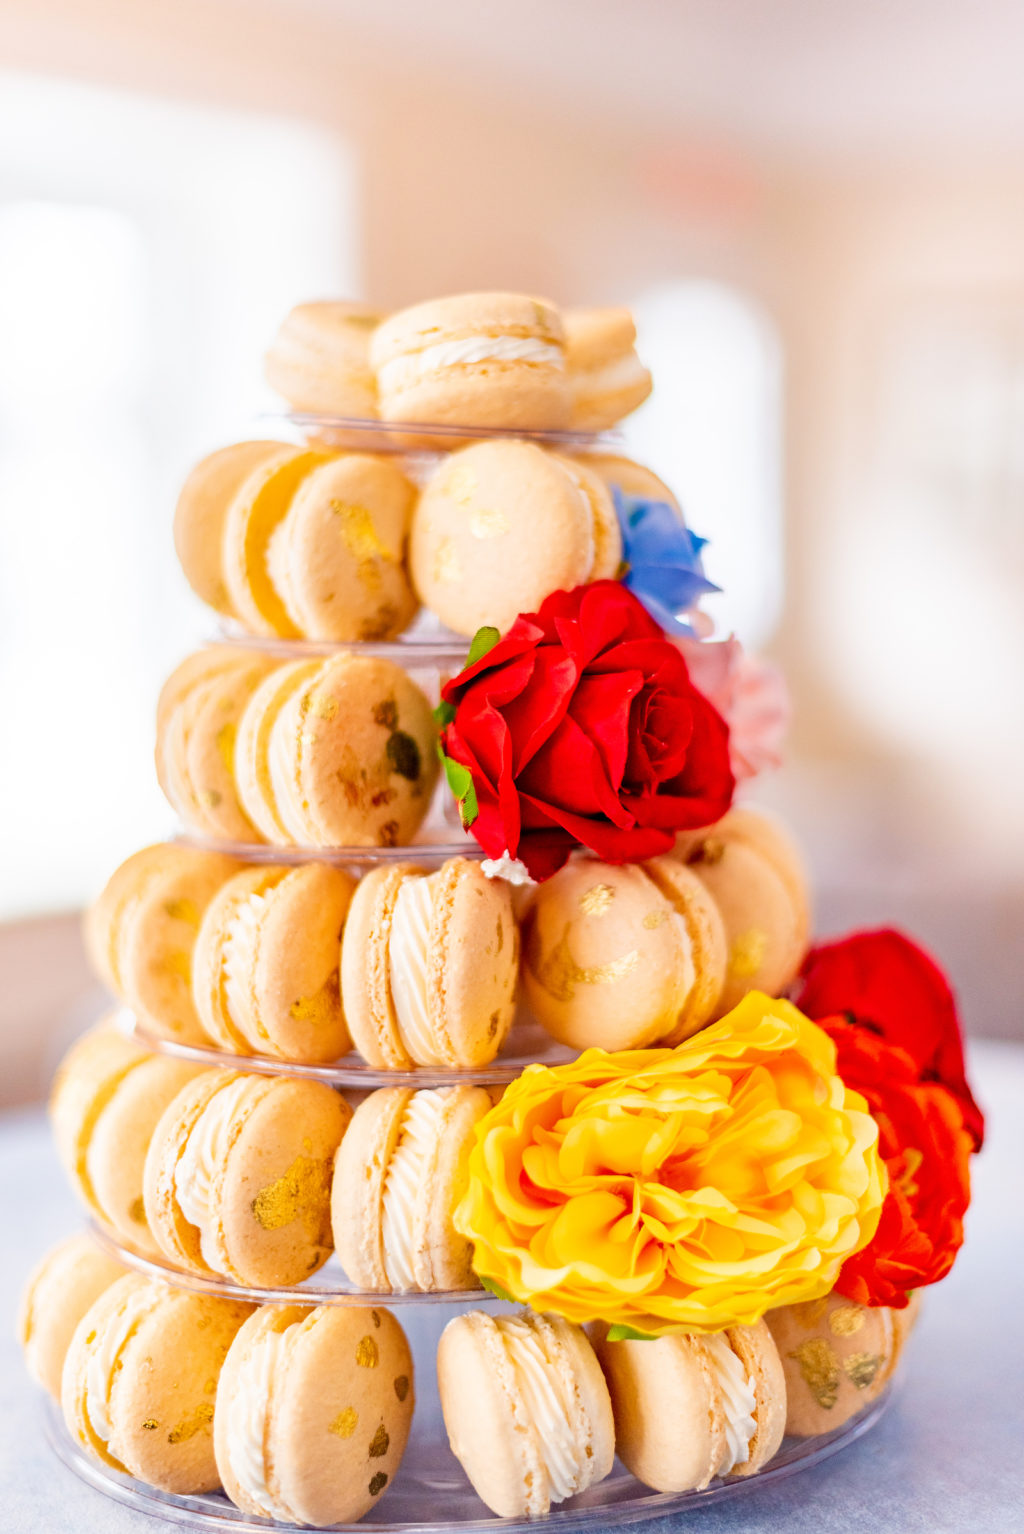 Wedding Macaron Tower Dessert Display with Colorful Flowers